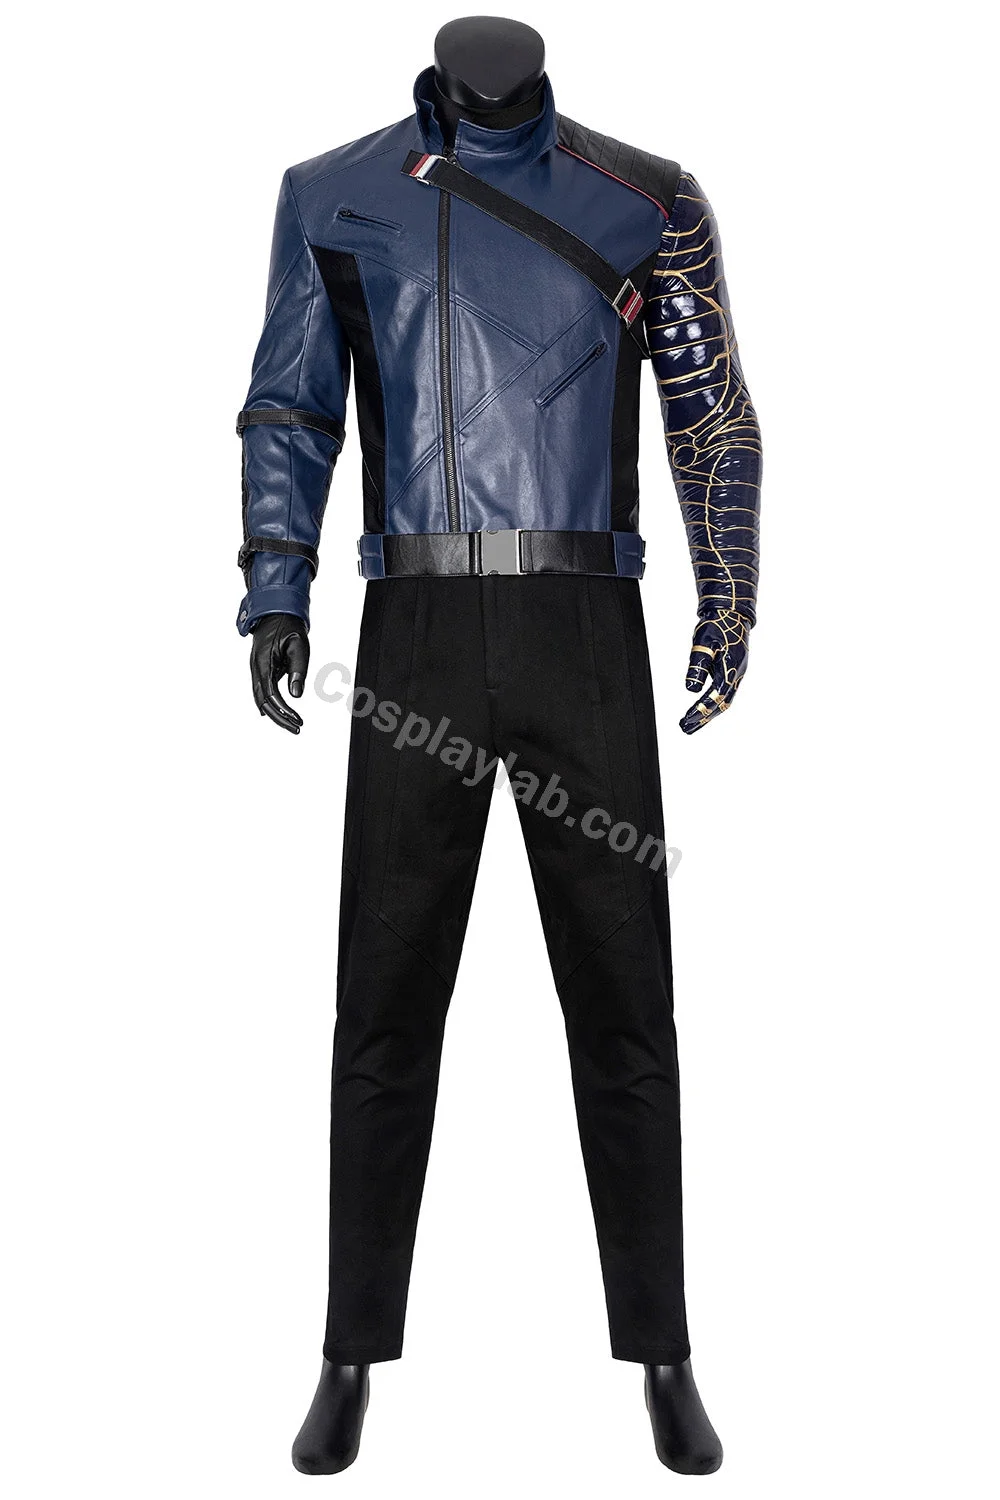 Winter Soldier Costume The Falcon and the Winter Soldier Bucky Barnes Leather Cosplay Suit